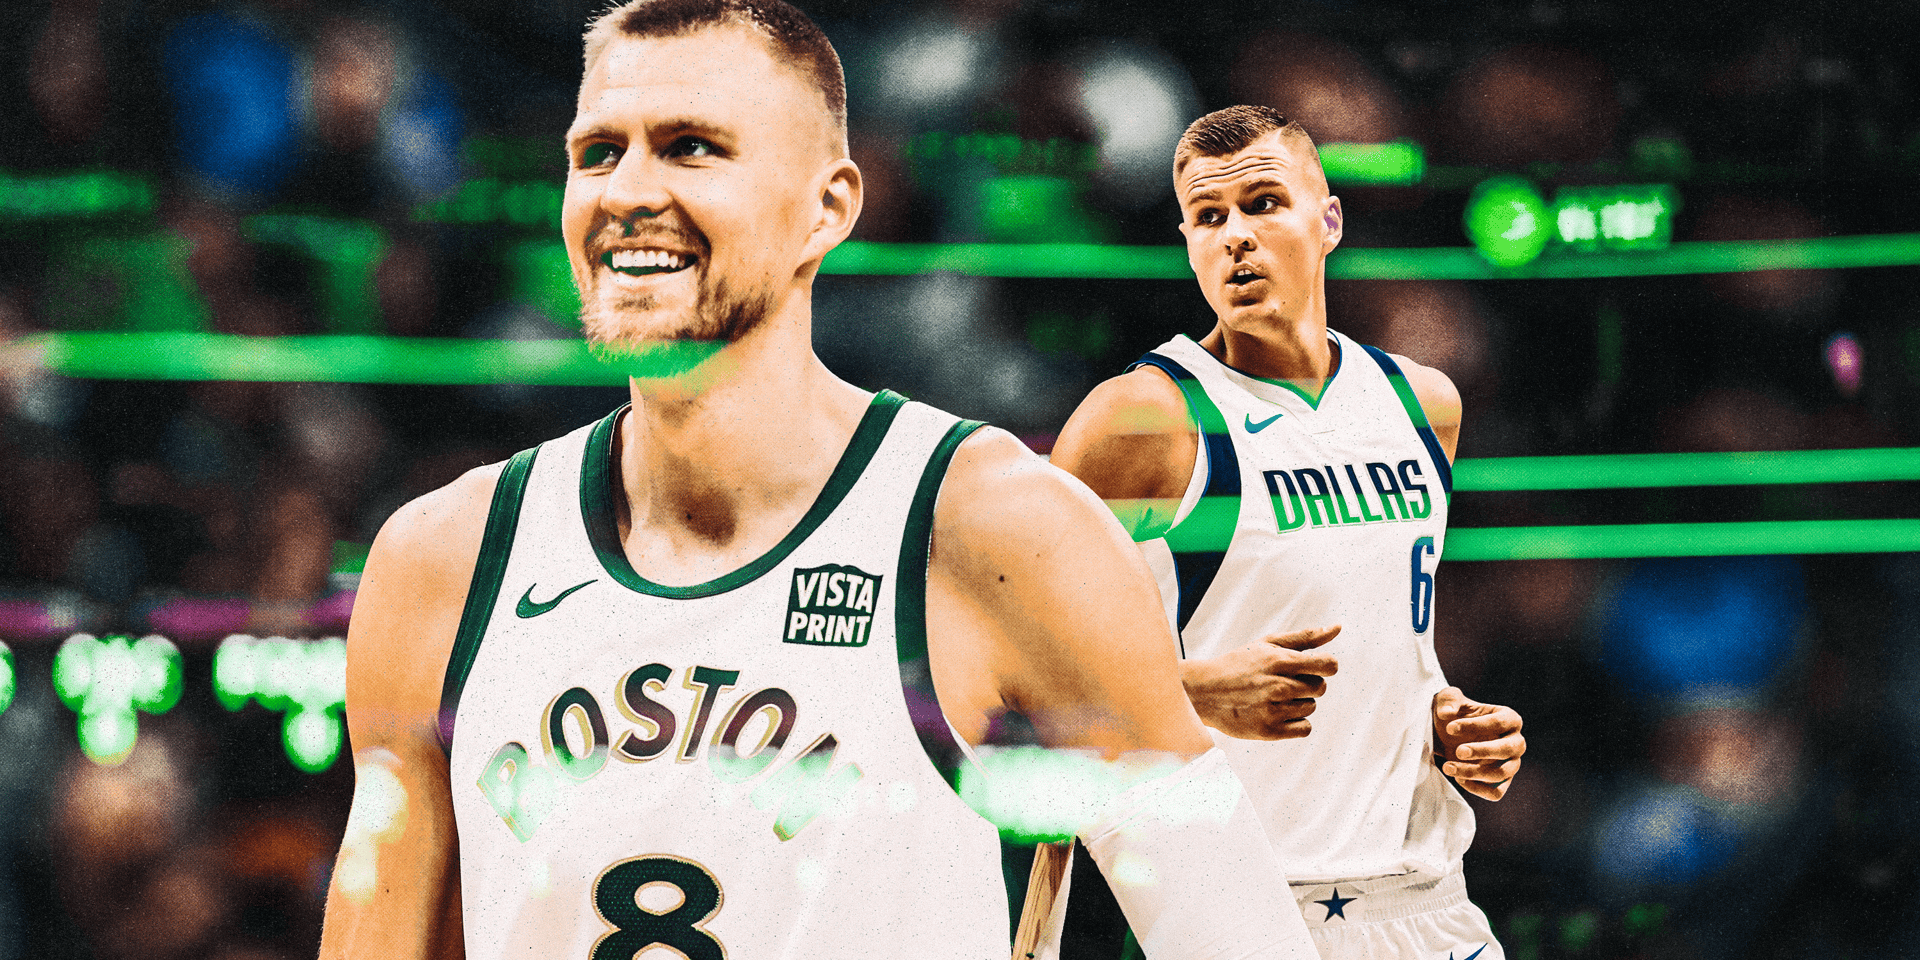 Kristaps Porziņģis’ career was at a crossroads. Then he learned to trust the numbers